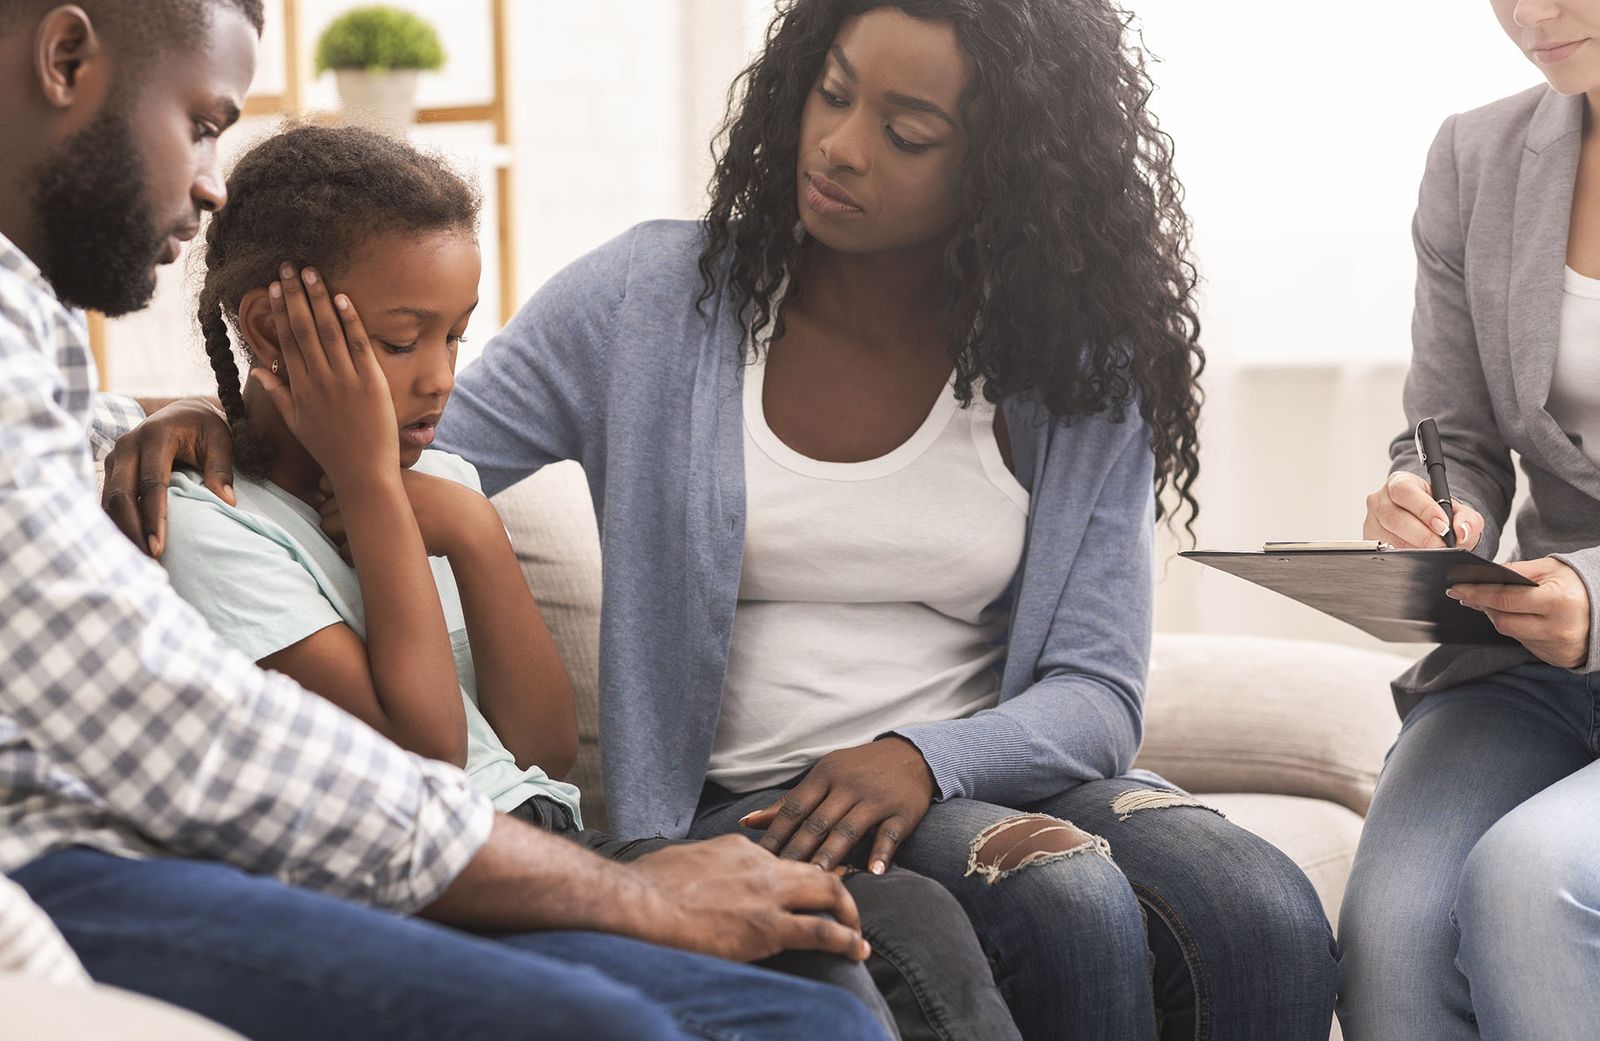 How Does Substance Abuse Affect Families?